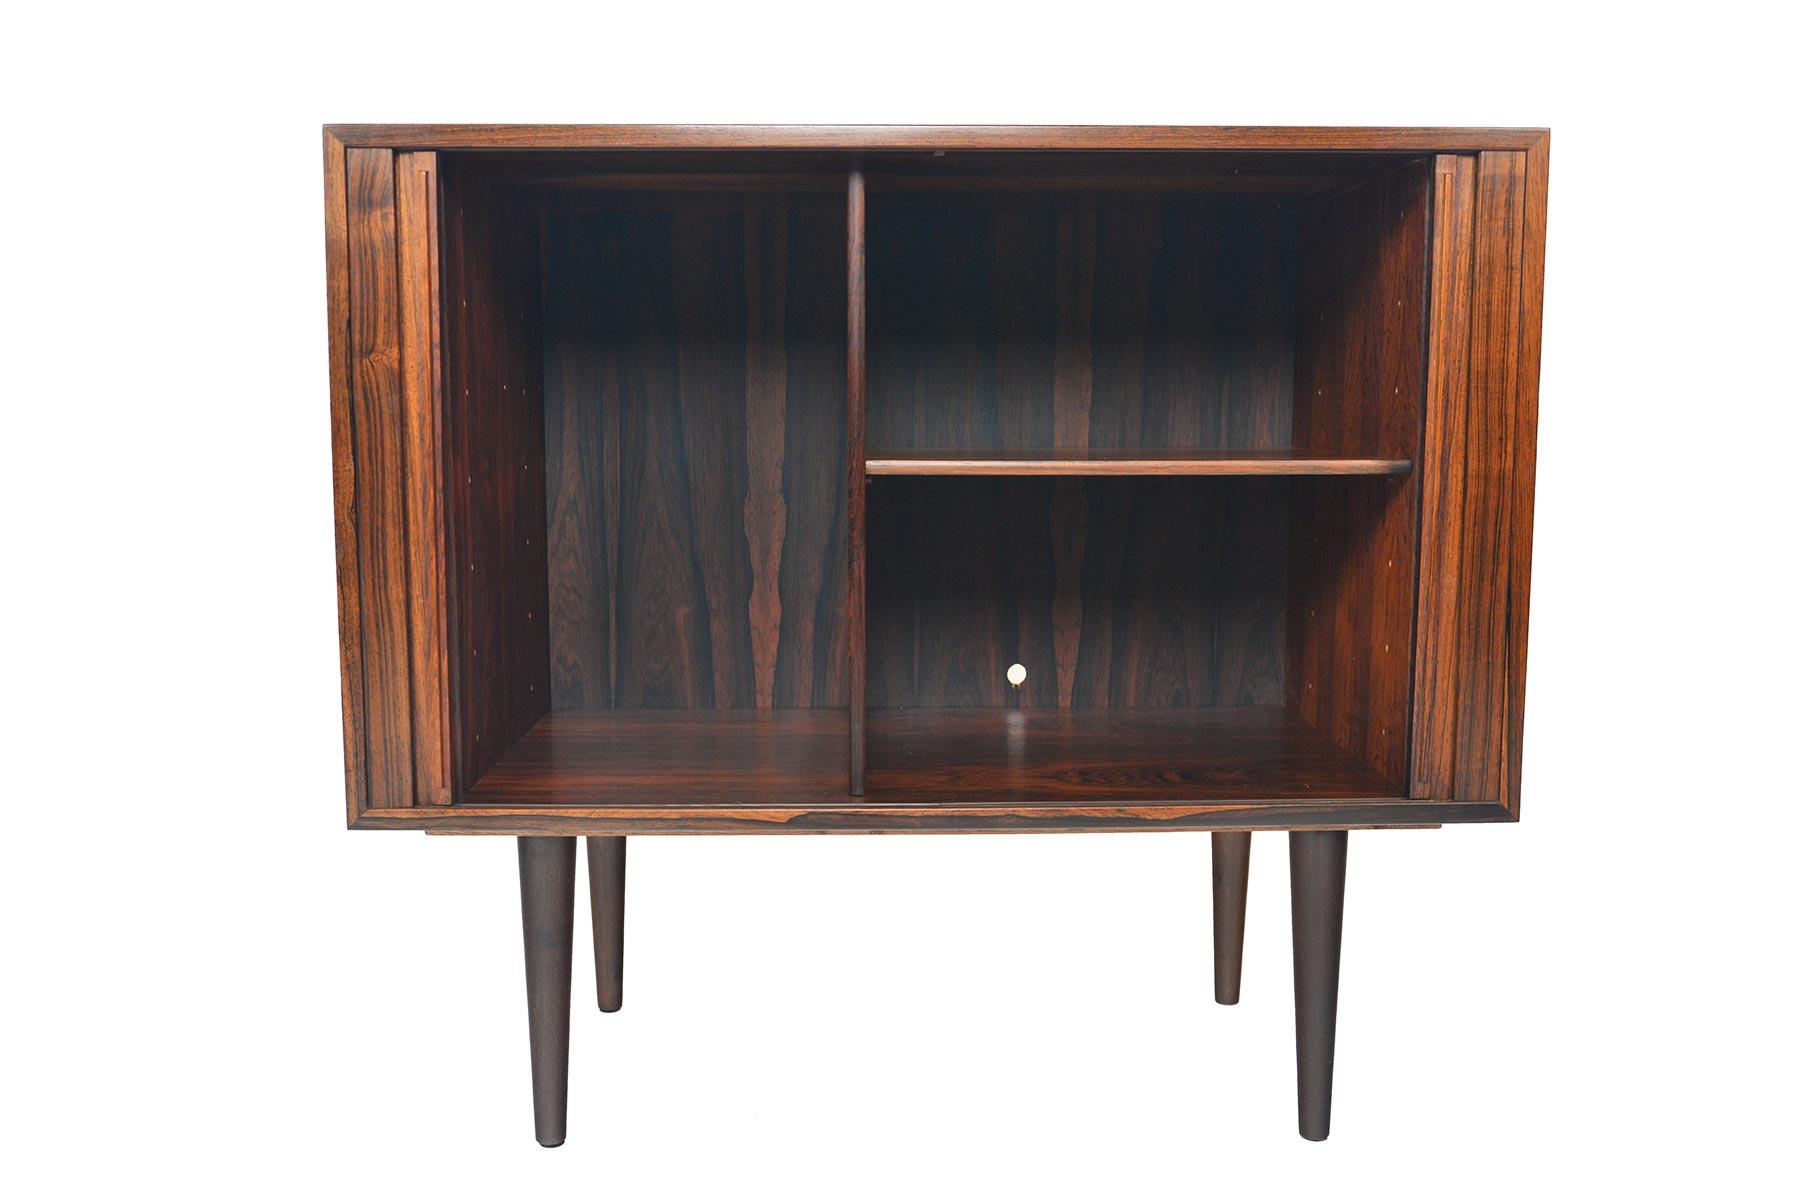 This Danish modern midcentury small tambour door credenza in rosewood was designed by Kai Kristiansen in the 1960s. This fantastic piece features two tambour doors which open to reveal two bays with an adjustable. In excellent original condition